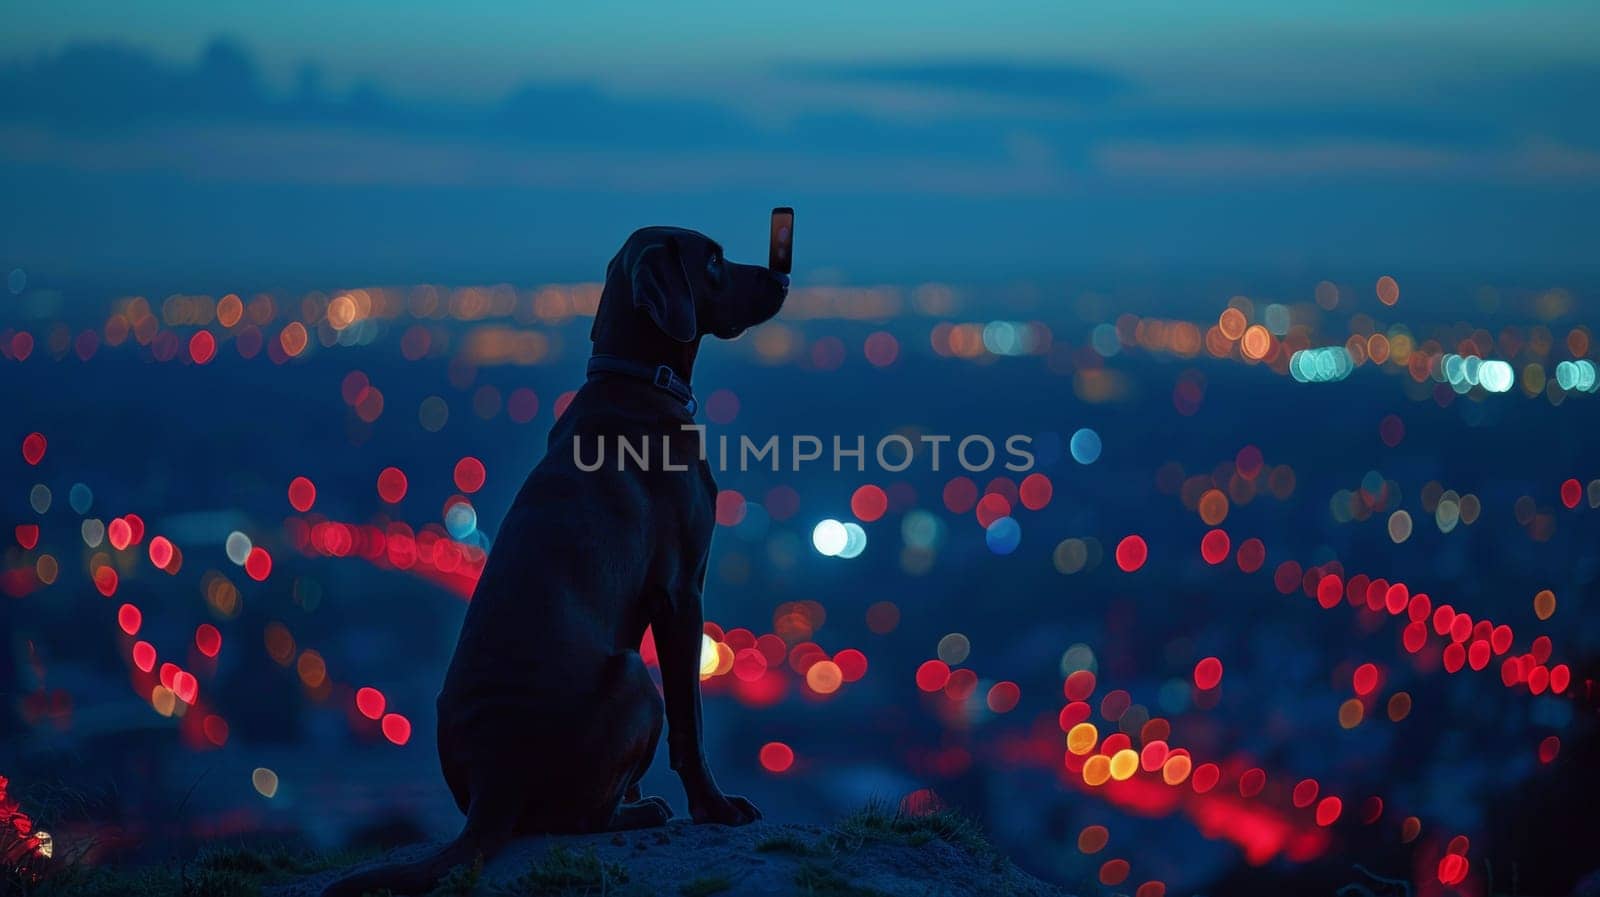 A dog sitting on a hill looking at the city lights